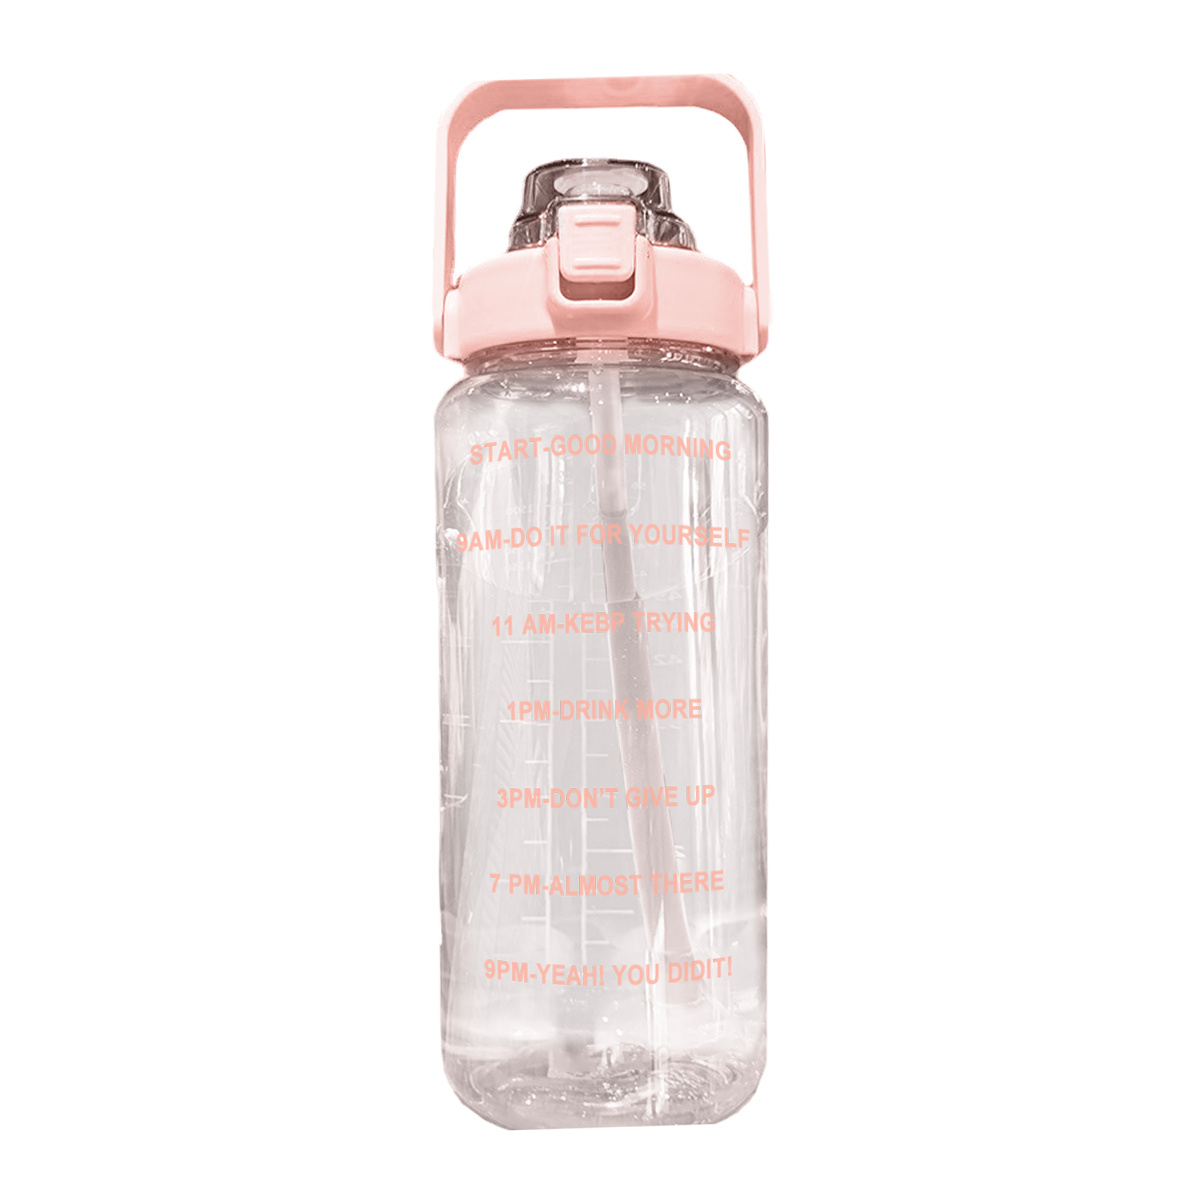 2000ml Sports Water Bottle: BPA Free, Portable, Leak Proof Shaker Bottle for Outdoor Drinkware, Tour, Gym and Kitchen